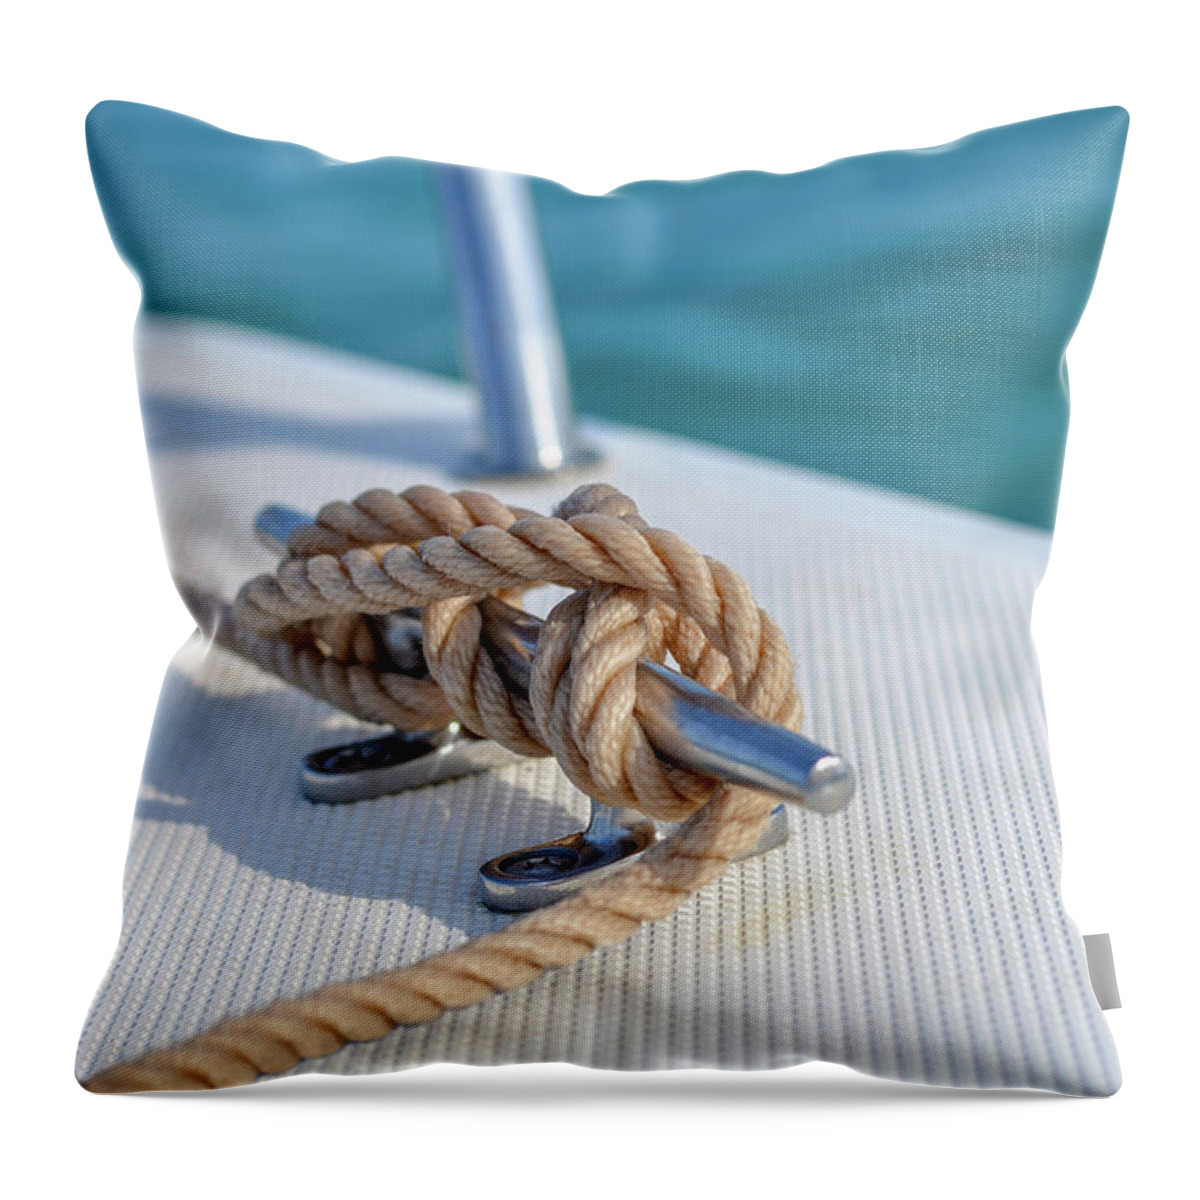 Sailors Knot Throw Pillow featuring the photograph Anchor Line #1 by Laura Fasulo